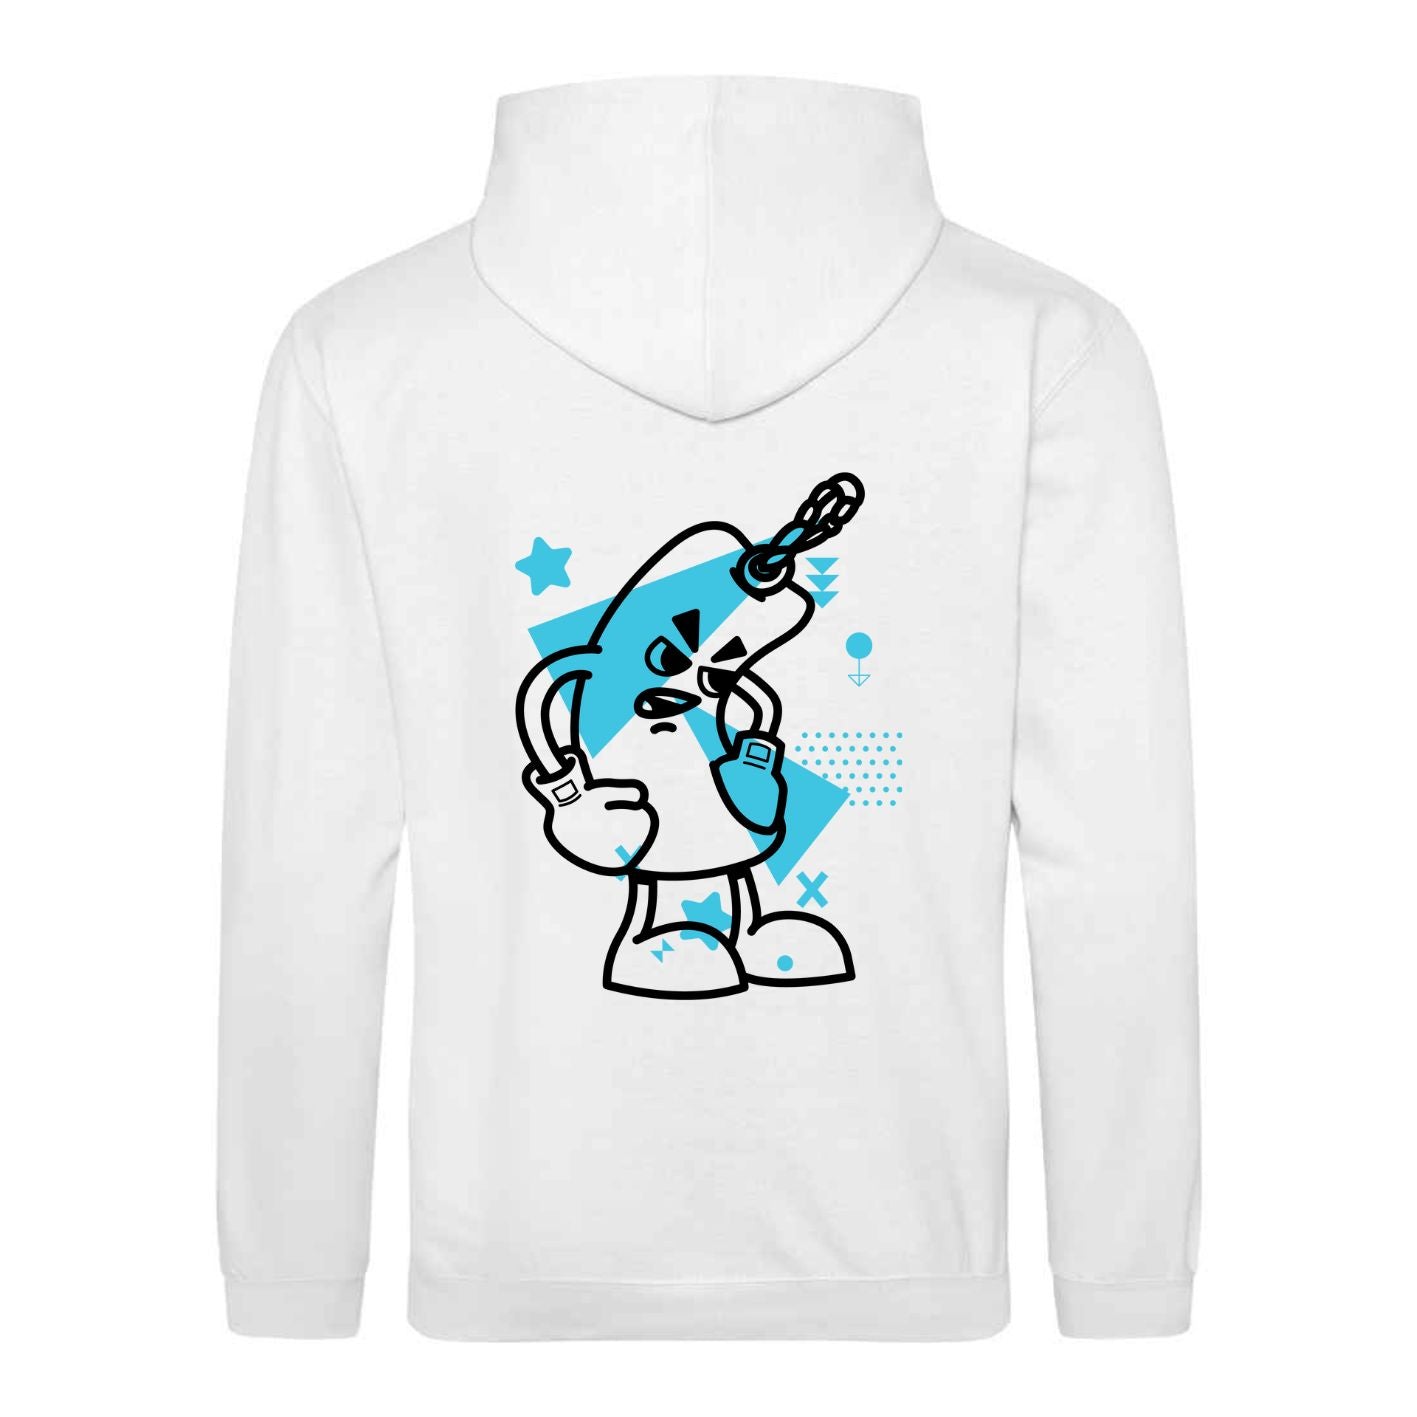 Knock Out depression hoodie in white